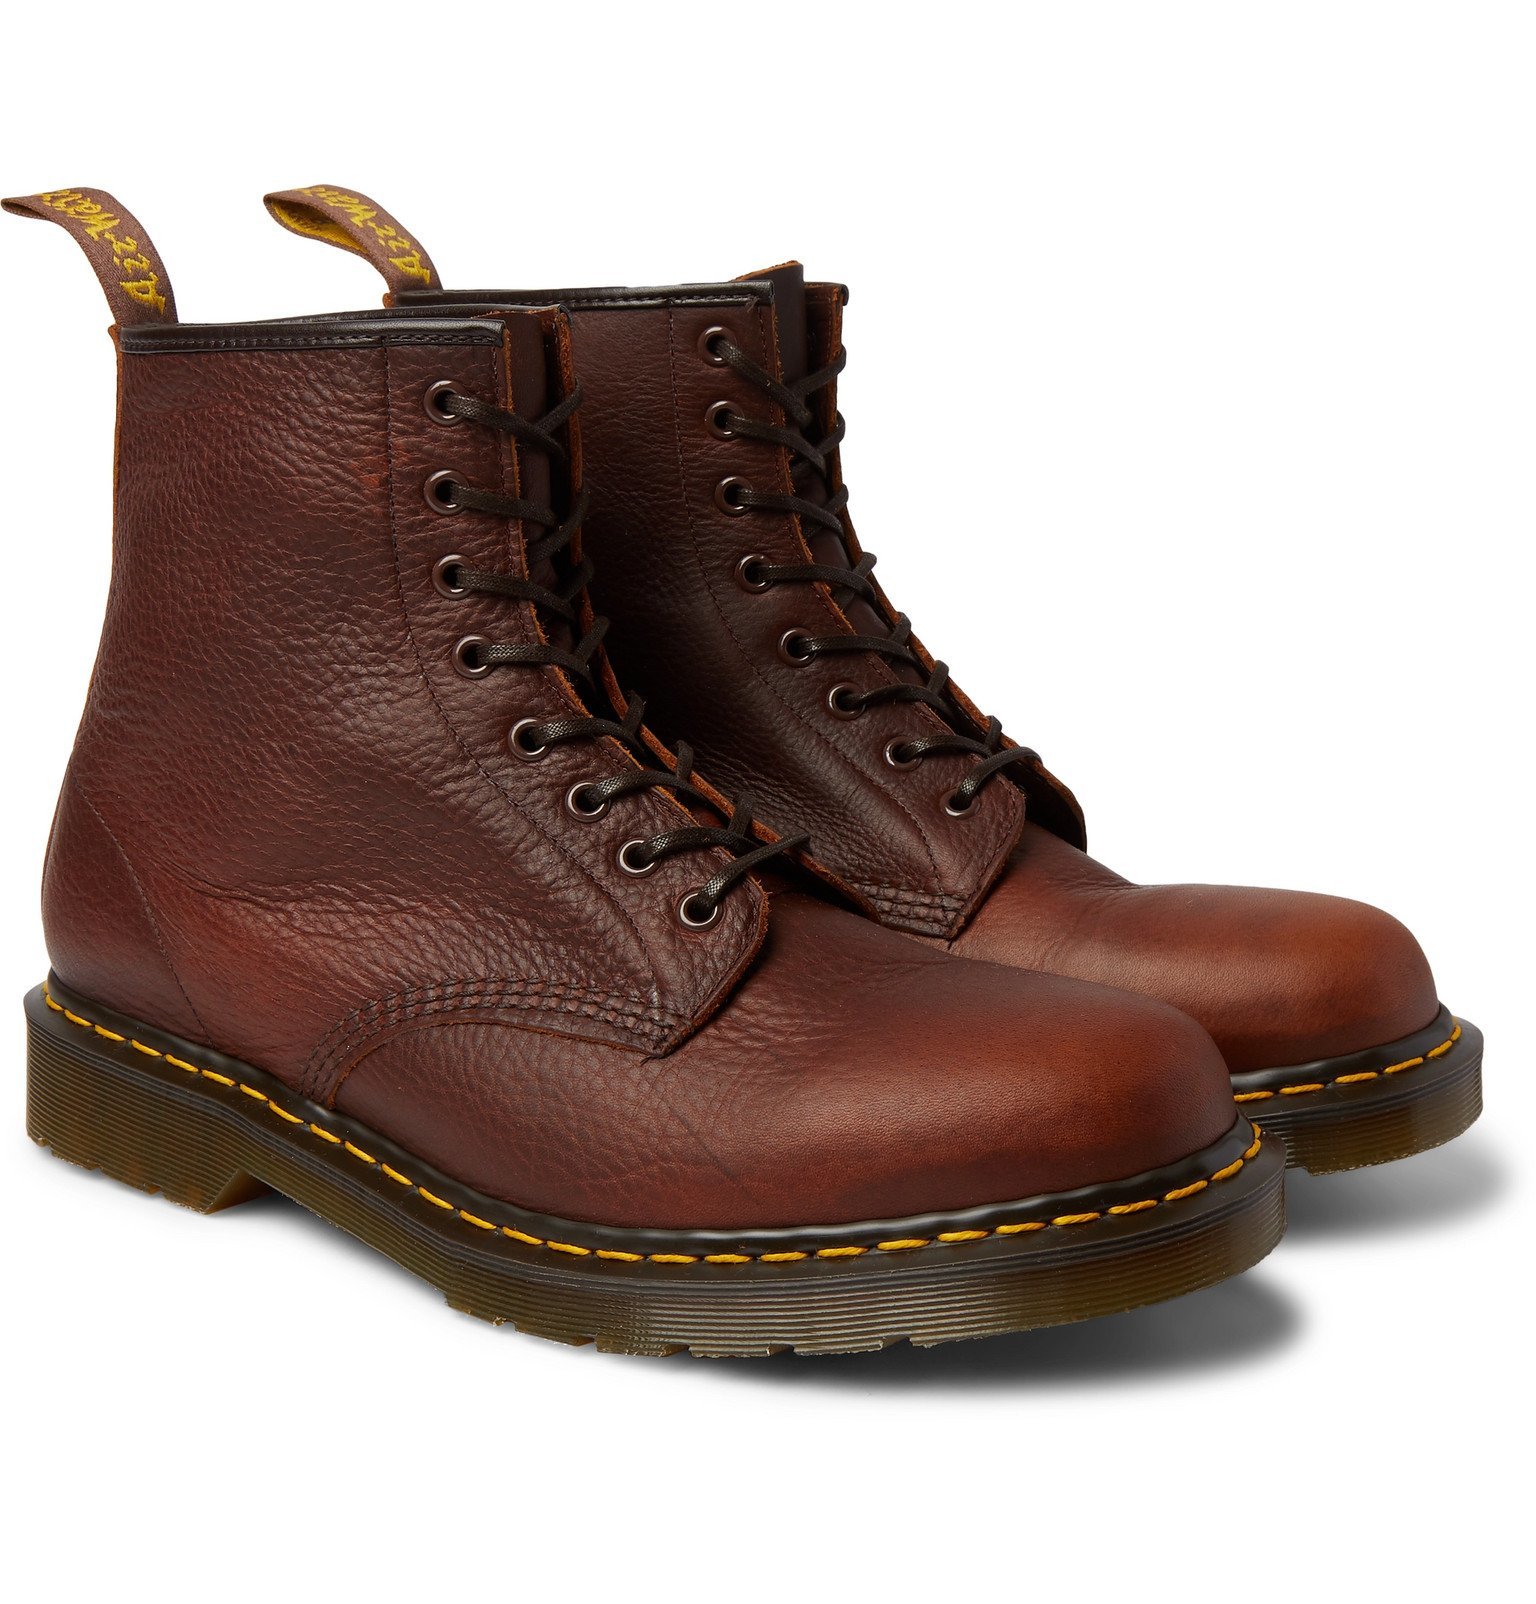 Dr. Martens - 1460 Full-Grain Leather Boots - Brown Dr. Martens